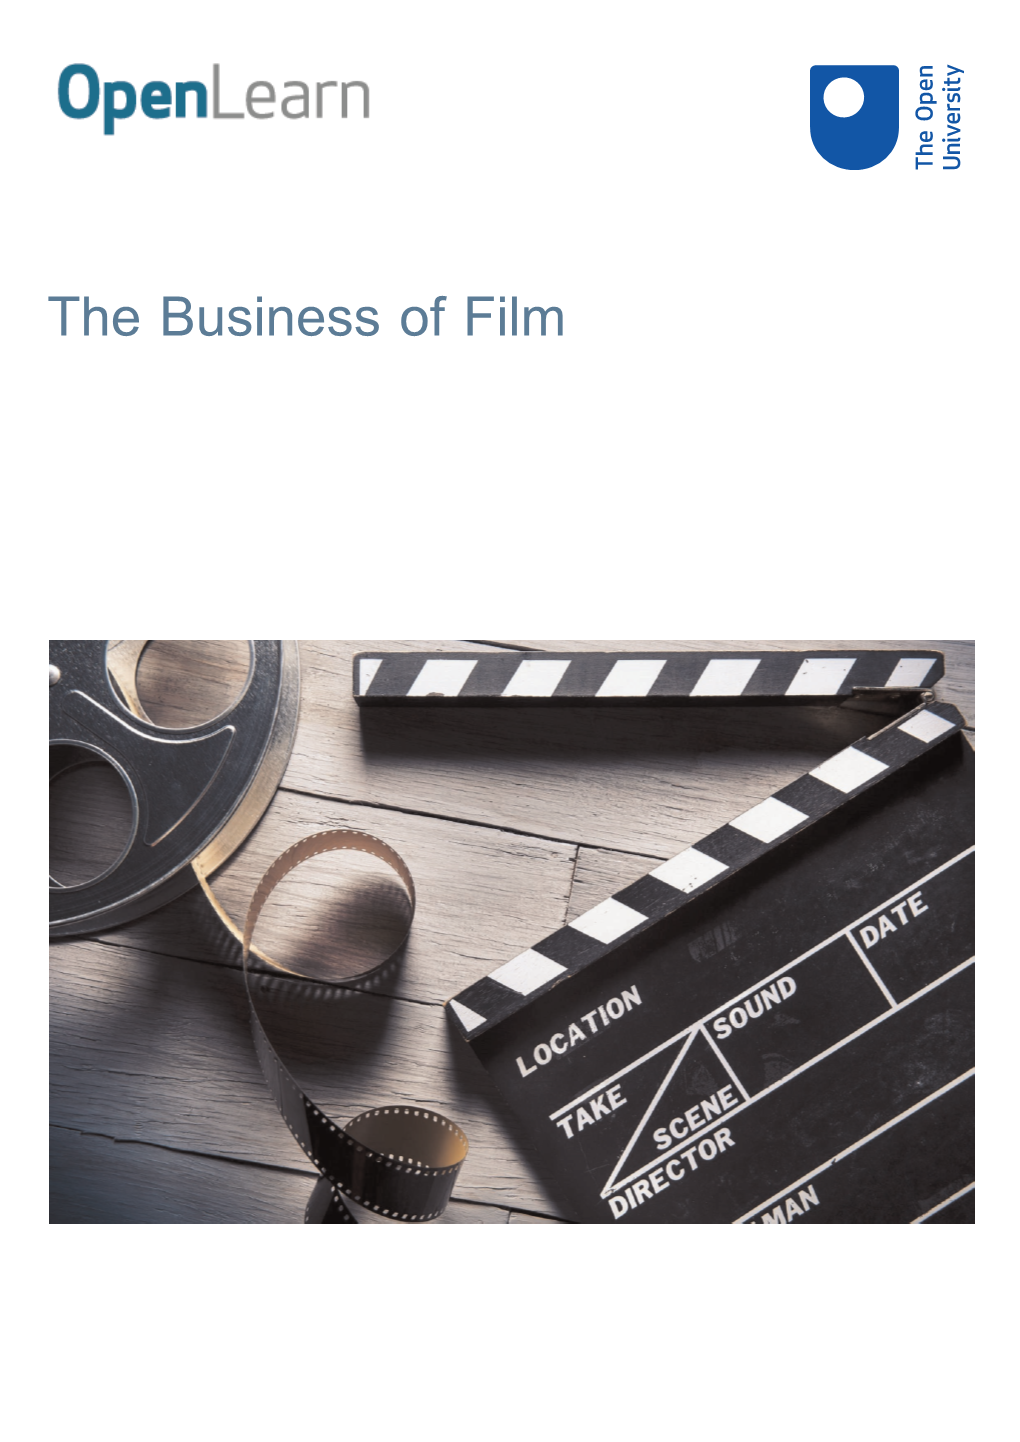 The Business of Film About This Free Course This Version of the Content May Include Video, Images and Interactive Content That May Not Be Optimised for Your Device